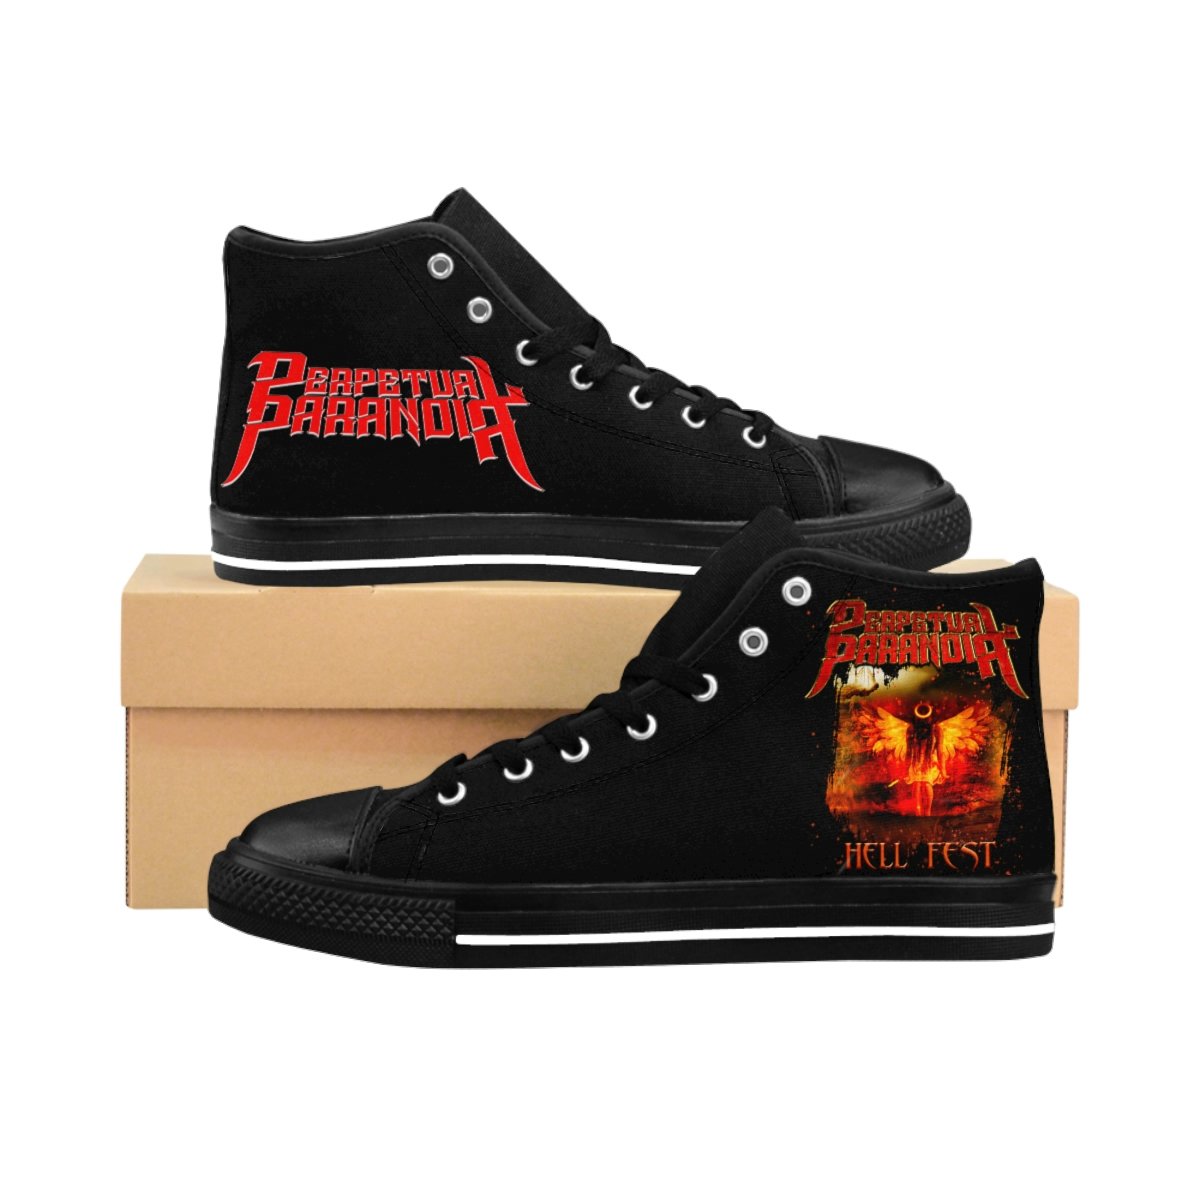 Perpetual Paranoia – Hell Fest Women’s High-top Sneakers